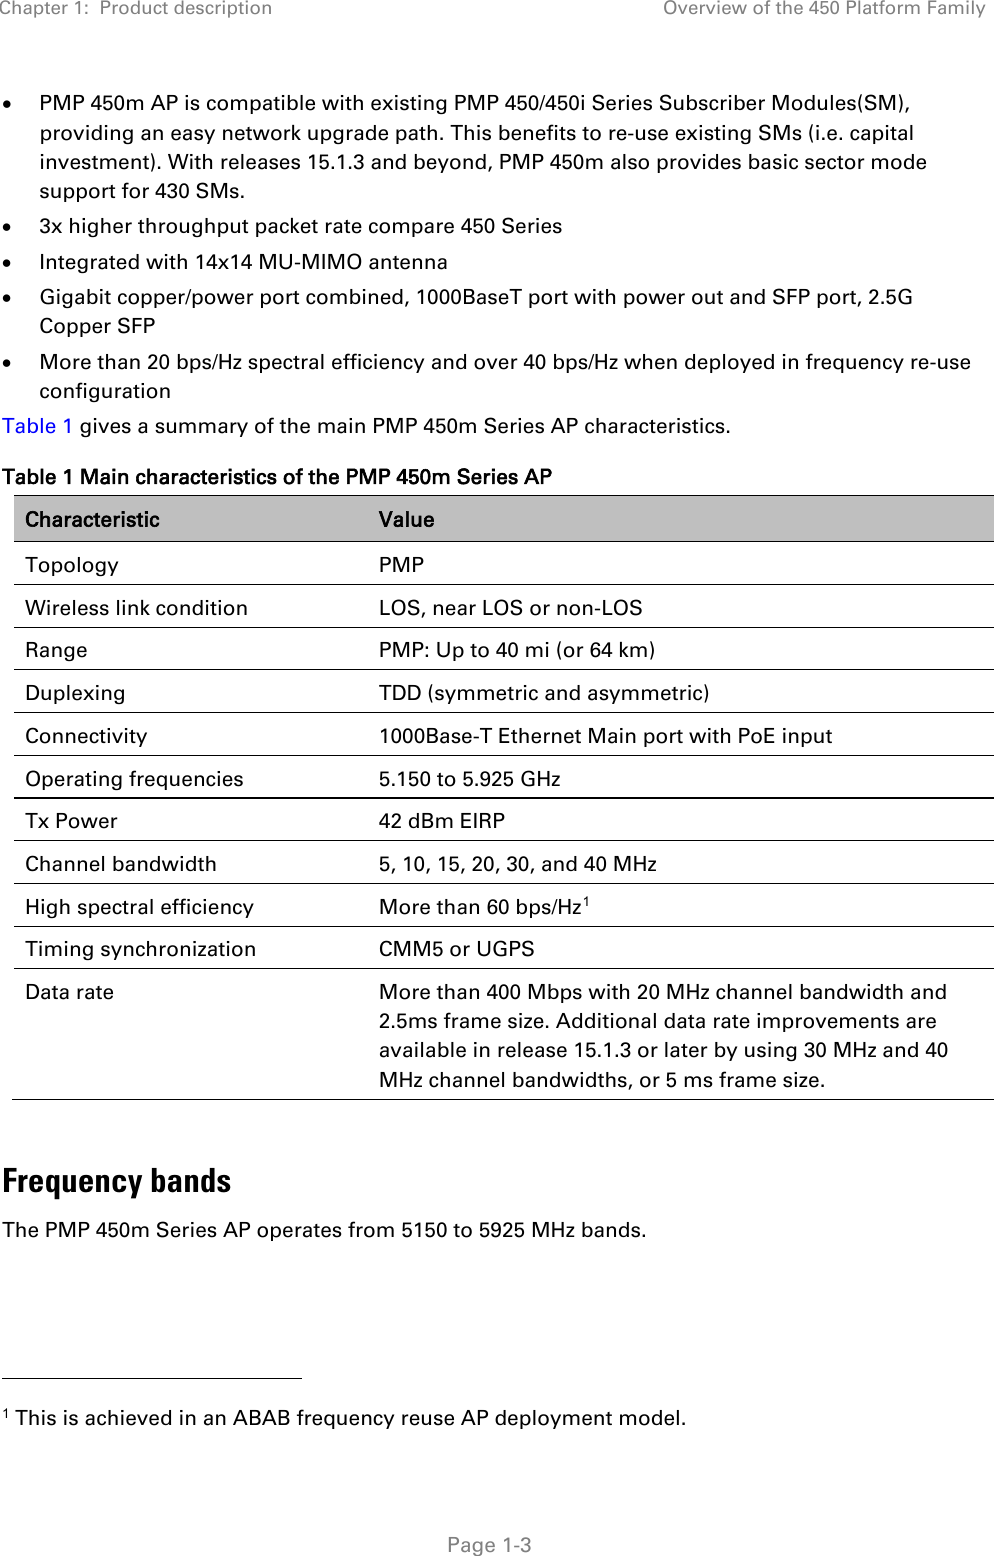 Chapter 1:  Product description Overview of the 450 Platform Family   Page 1-3 • PMP 450m AP is compatible with existing PMP 450/450i Series Subscriber Modules(SM), providing an easy network upgrade path. This benefits to re-use existing SMs (i.e. capital investment). With releases 15.1.3 and beyond, PMP 450m also provides basic sector mode support for 430 SMs. • 3x higher throughput packet rate compare 450 Series • Integrated with 14x14 MU-MIMO antenna • Gigabit copper/power port combined, 1000BaseT port with power out and SFP port, 2.5G Copper SFP • More than 20 bps/Hz spectral efficiency and over 40 bps/Hz when deployed in frequency re-use configuration Table 1 gives a summary of the main PMP 450m Series AP characteristics. Table 1 Main characteristics of the PMP 450m Series AP Characteristic Value Topology  PMP Wireless link condition LOS, near LOS or non-LOS Range  PMP: Up to 40 mi (or 64 km) Duplexing  TDD (symmetric and asymmetric) Connectivity 1000Base-T Ethernet Main port with PoE input Operating frequencies 5.150 to 5.925 GHz Tx Power 42 dBm EIRP Channel bandwidth 5, 10, 15, 20, 30, and 40 MHz High spectral efficiency More than 60 bps/Hz1 Timing synchronization CMM5 or UGPS Data rate More than 400 Mbps with 20 MHz channel bandwidth and 2.5ms frame size. Additional data rate improvements are available in release 15.1.3 or later by using 30 MHz and 40 MHz channel bandwidths, or 5 ms frame size.  Frequency bands The PMP 450m Series AP operates from 5150 to 5925 MHz bands.                                                 1 This is achieved in an ABAB frequency reuse AP deployment model. 